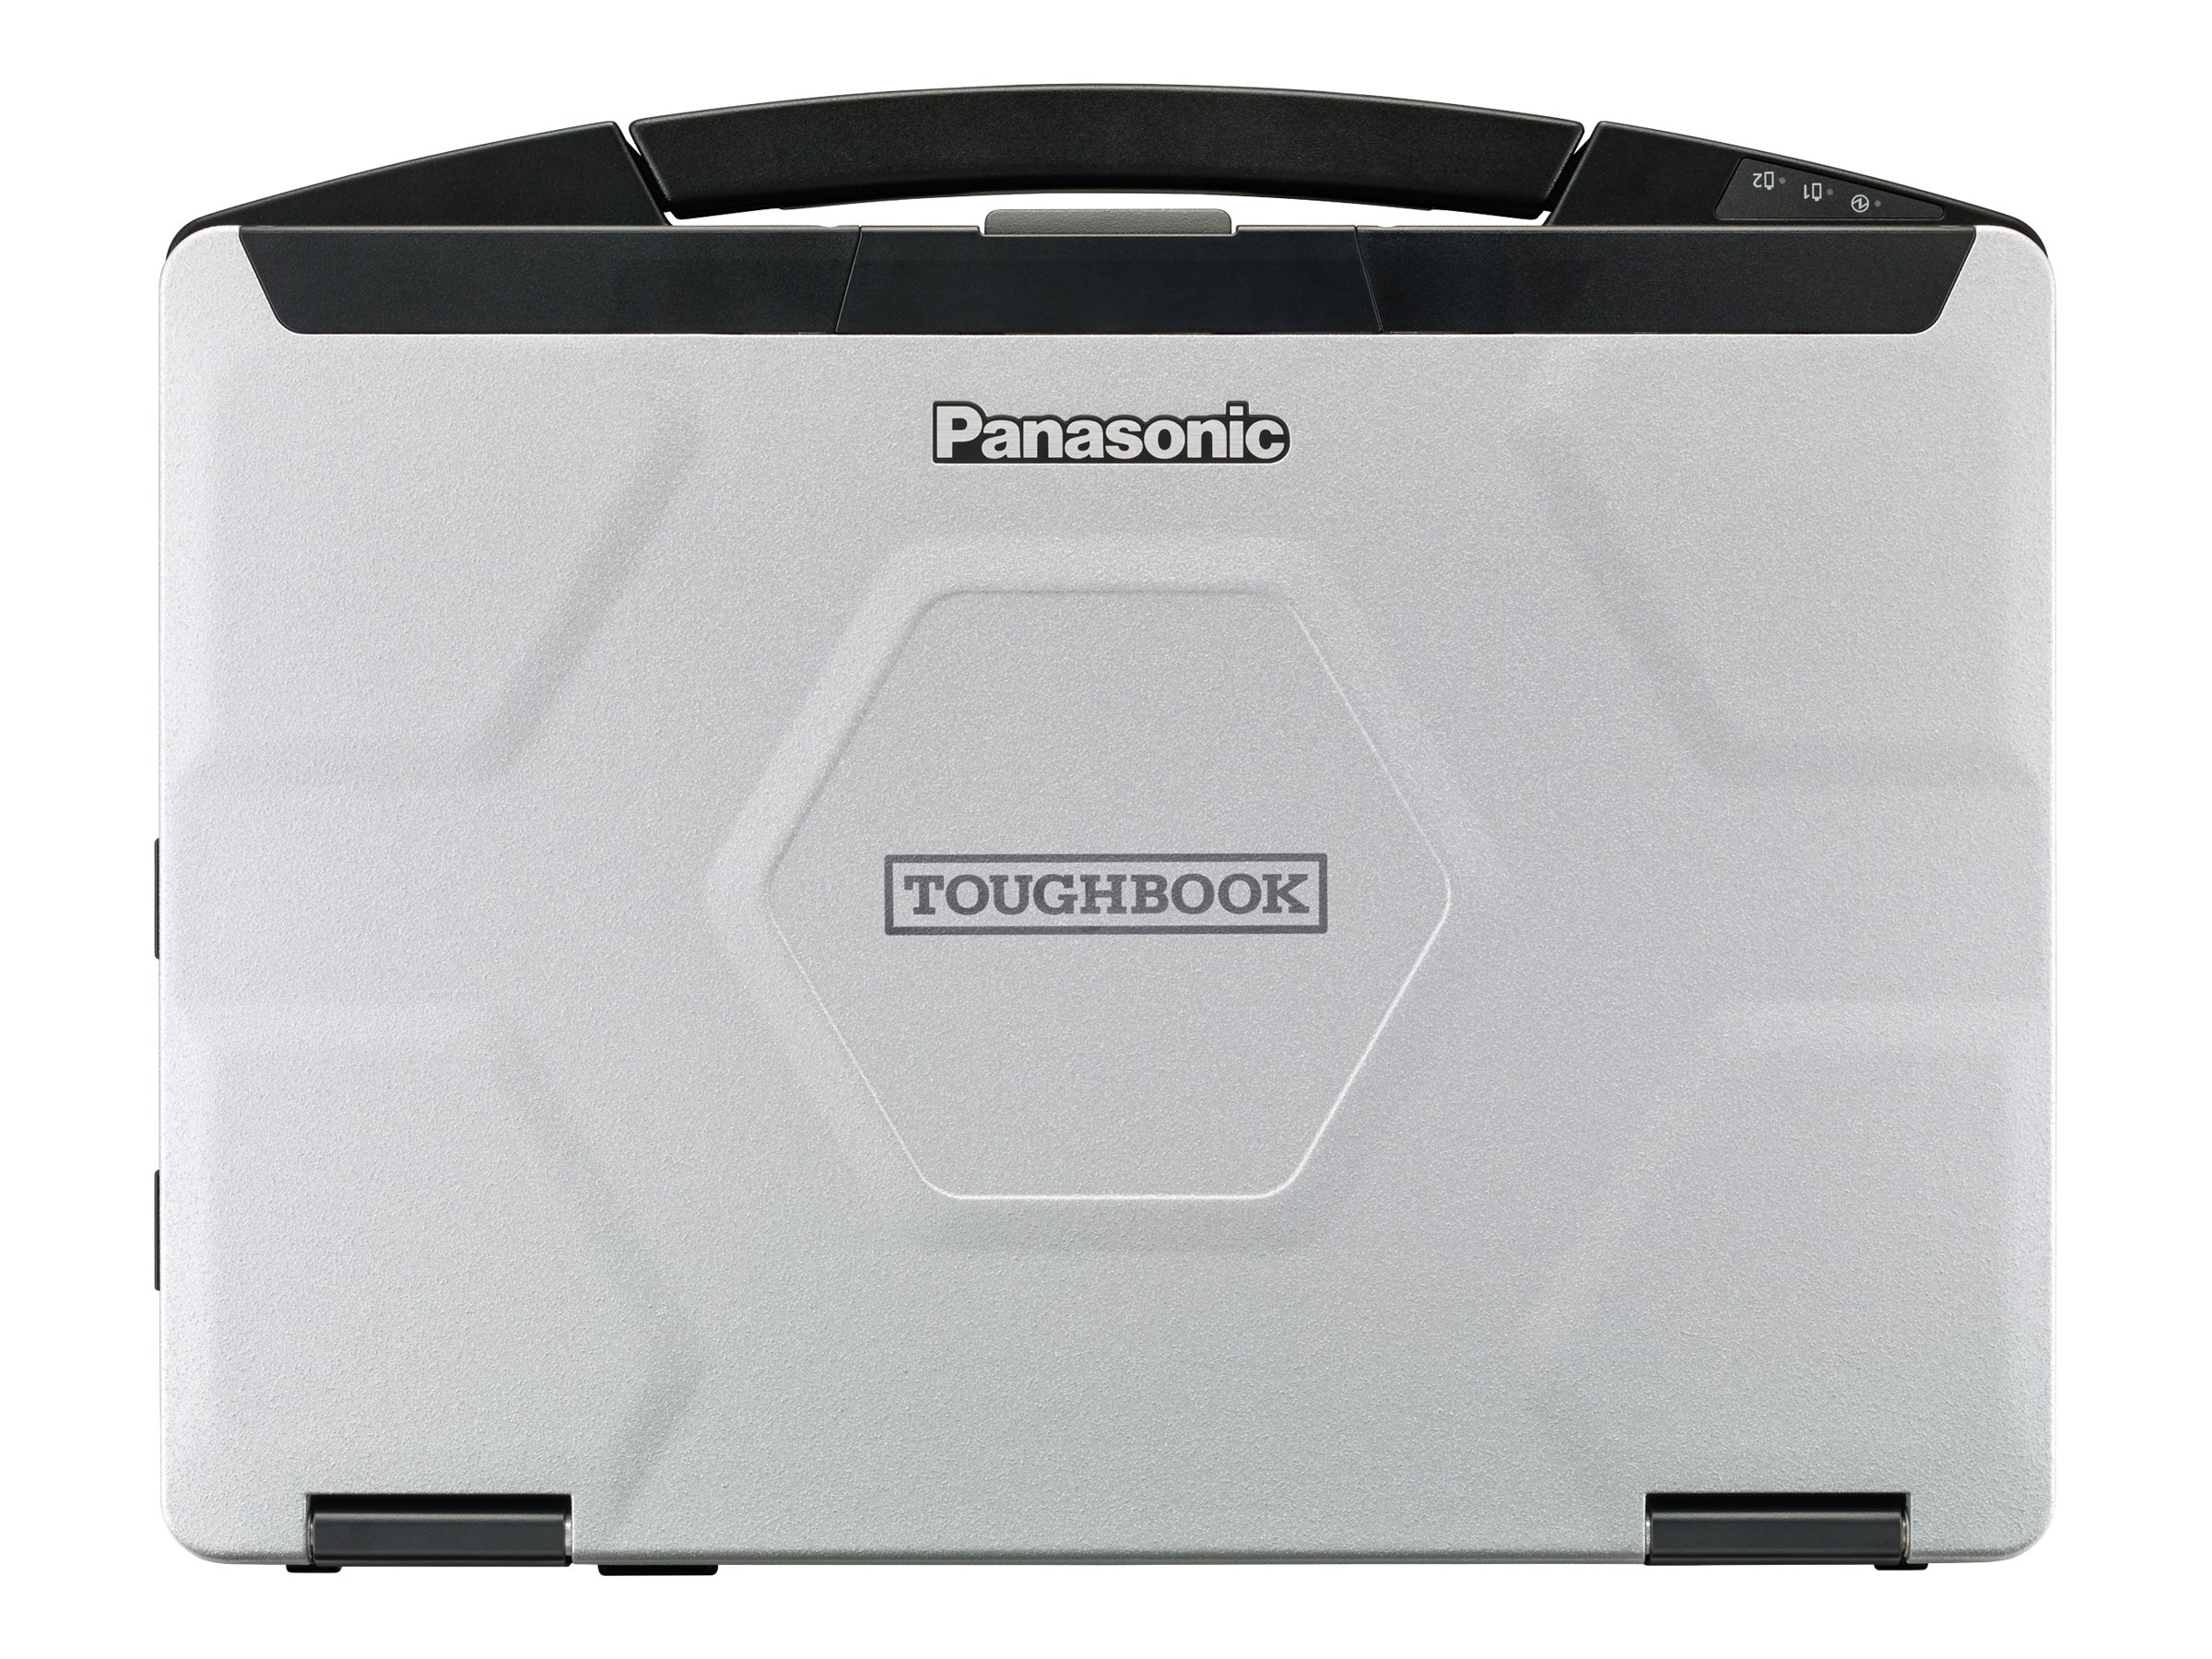 Panasonic Toughbook 54 Prime - Intel Core i5 - 7300U / up to 3.5 GHz - Win 10 Pro - HD Graphics 620 - 8 GB RAM - 256 GB SSD - DVD SuperMulti - 14" 1366 x 768 (HD) - with Toughbook Preferred - image 5 of 16